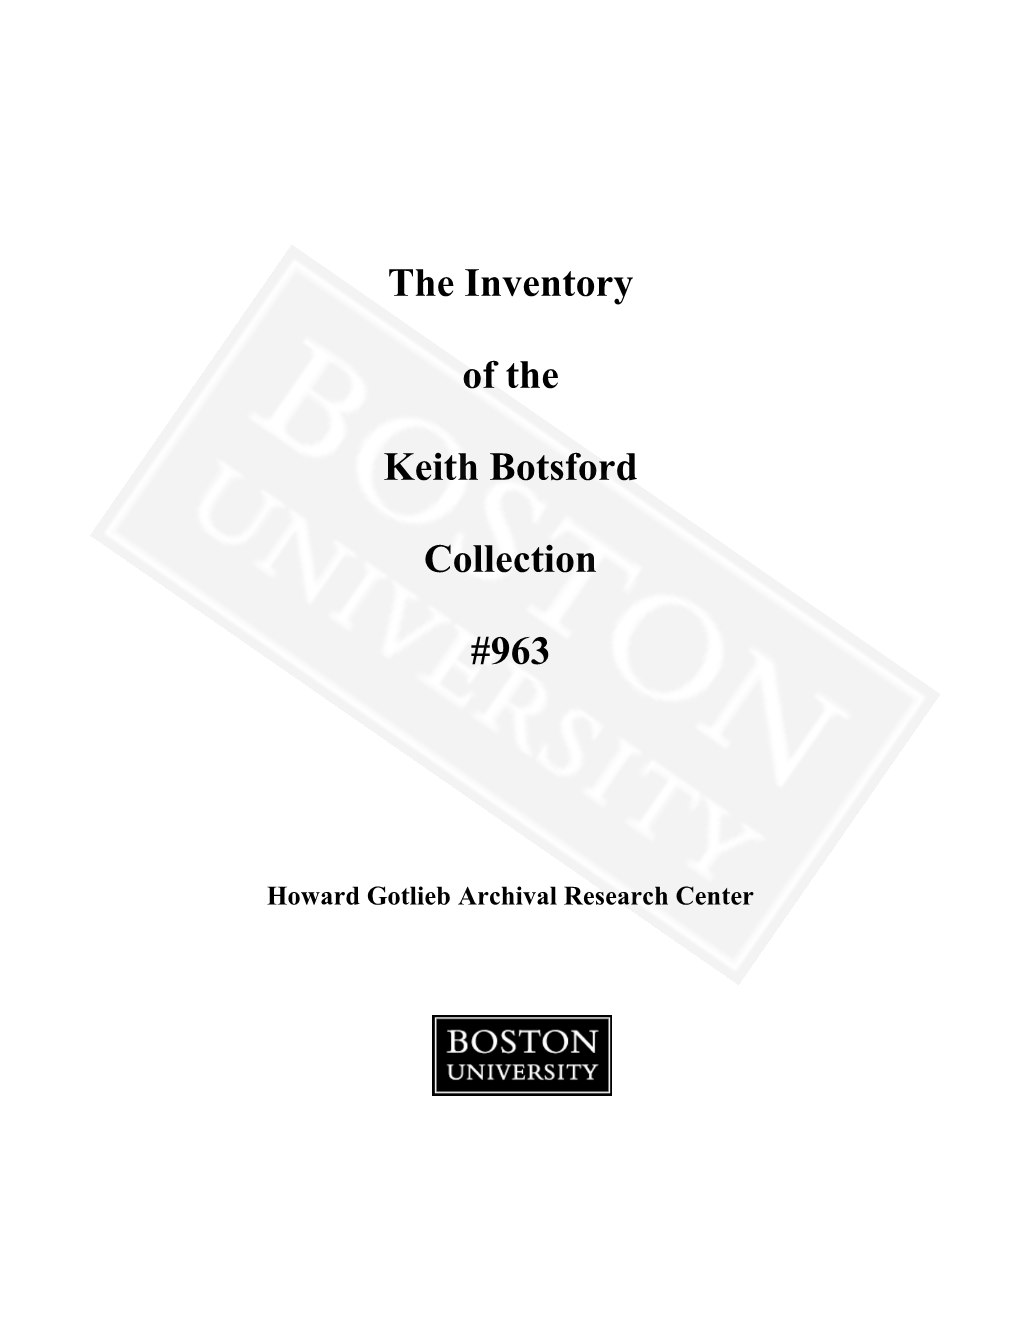 The Inventory of the Keith Botsford Collection #963